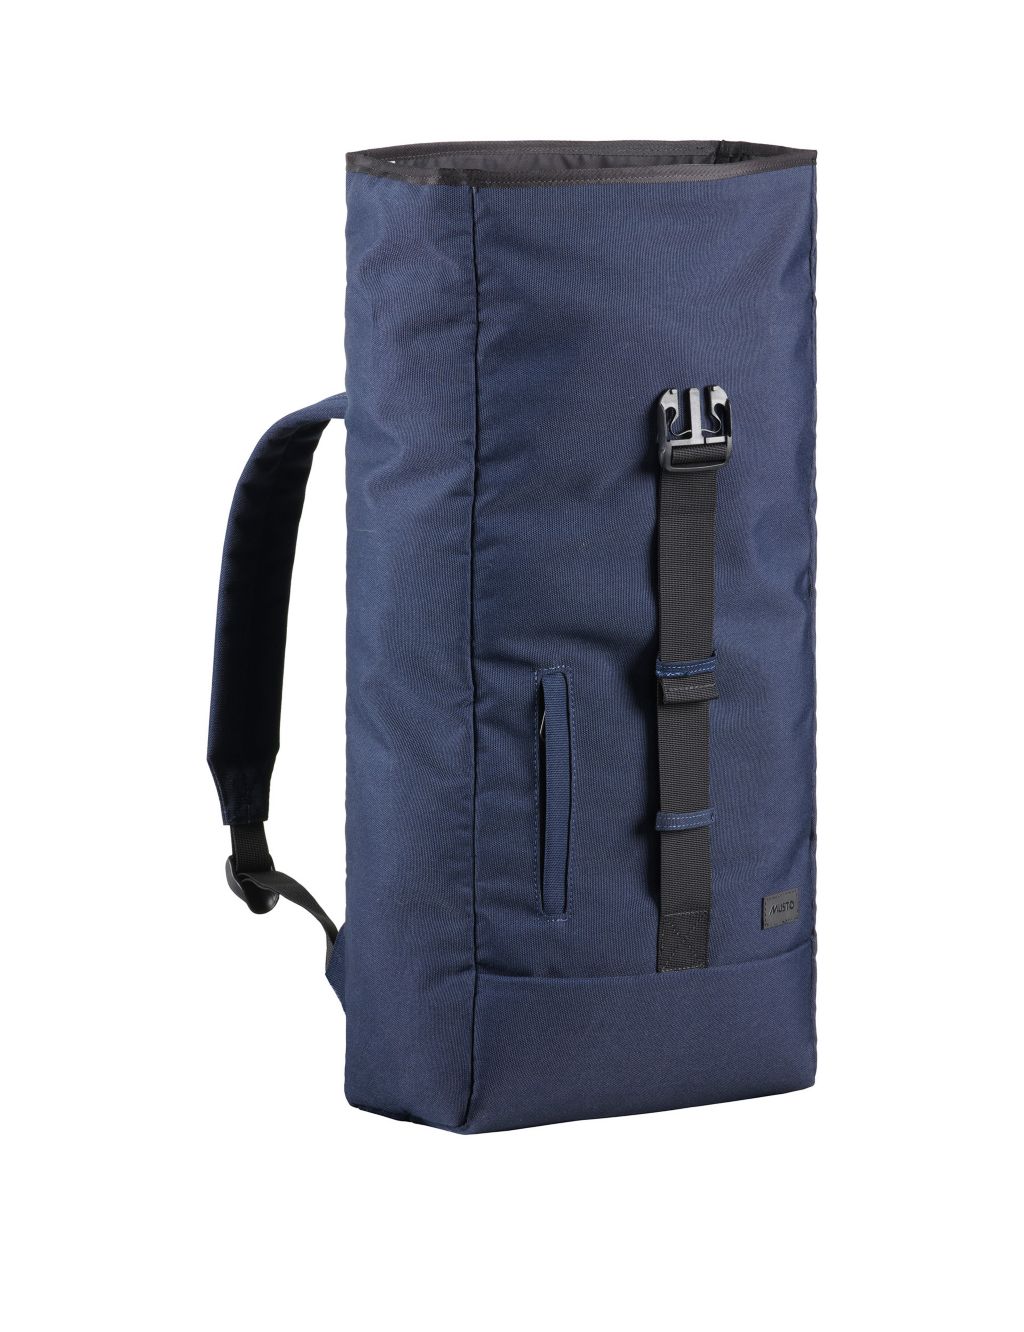 Canvas Rolltop Backpack image 5